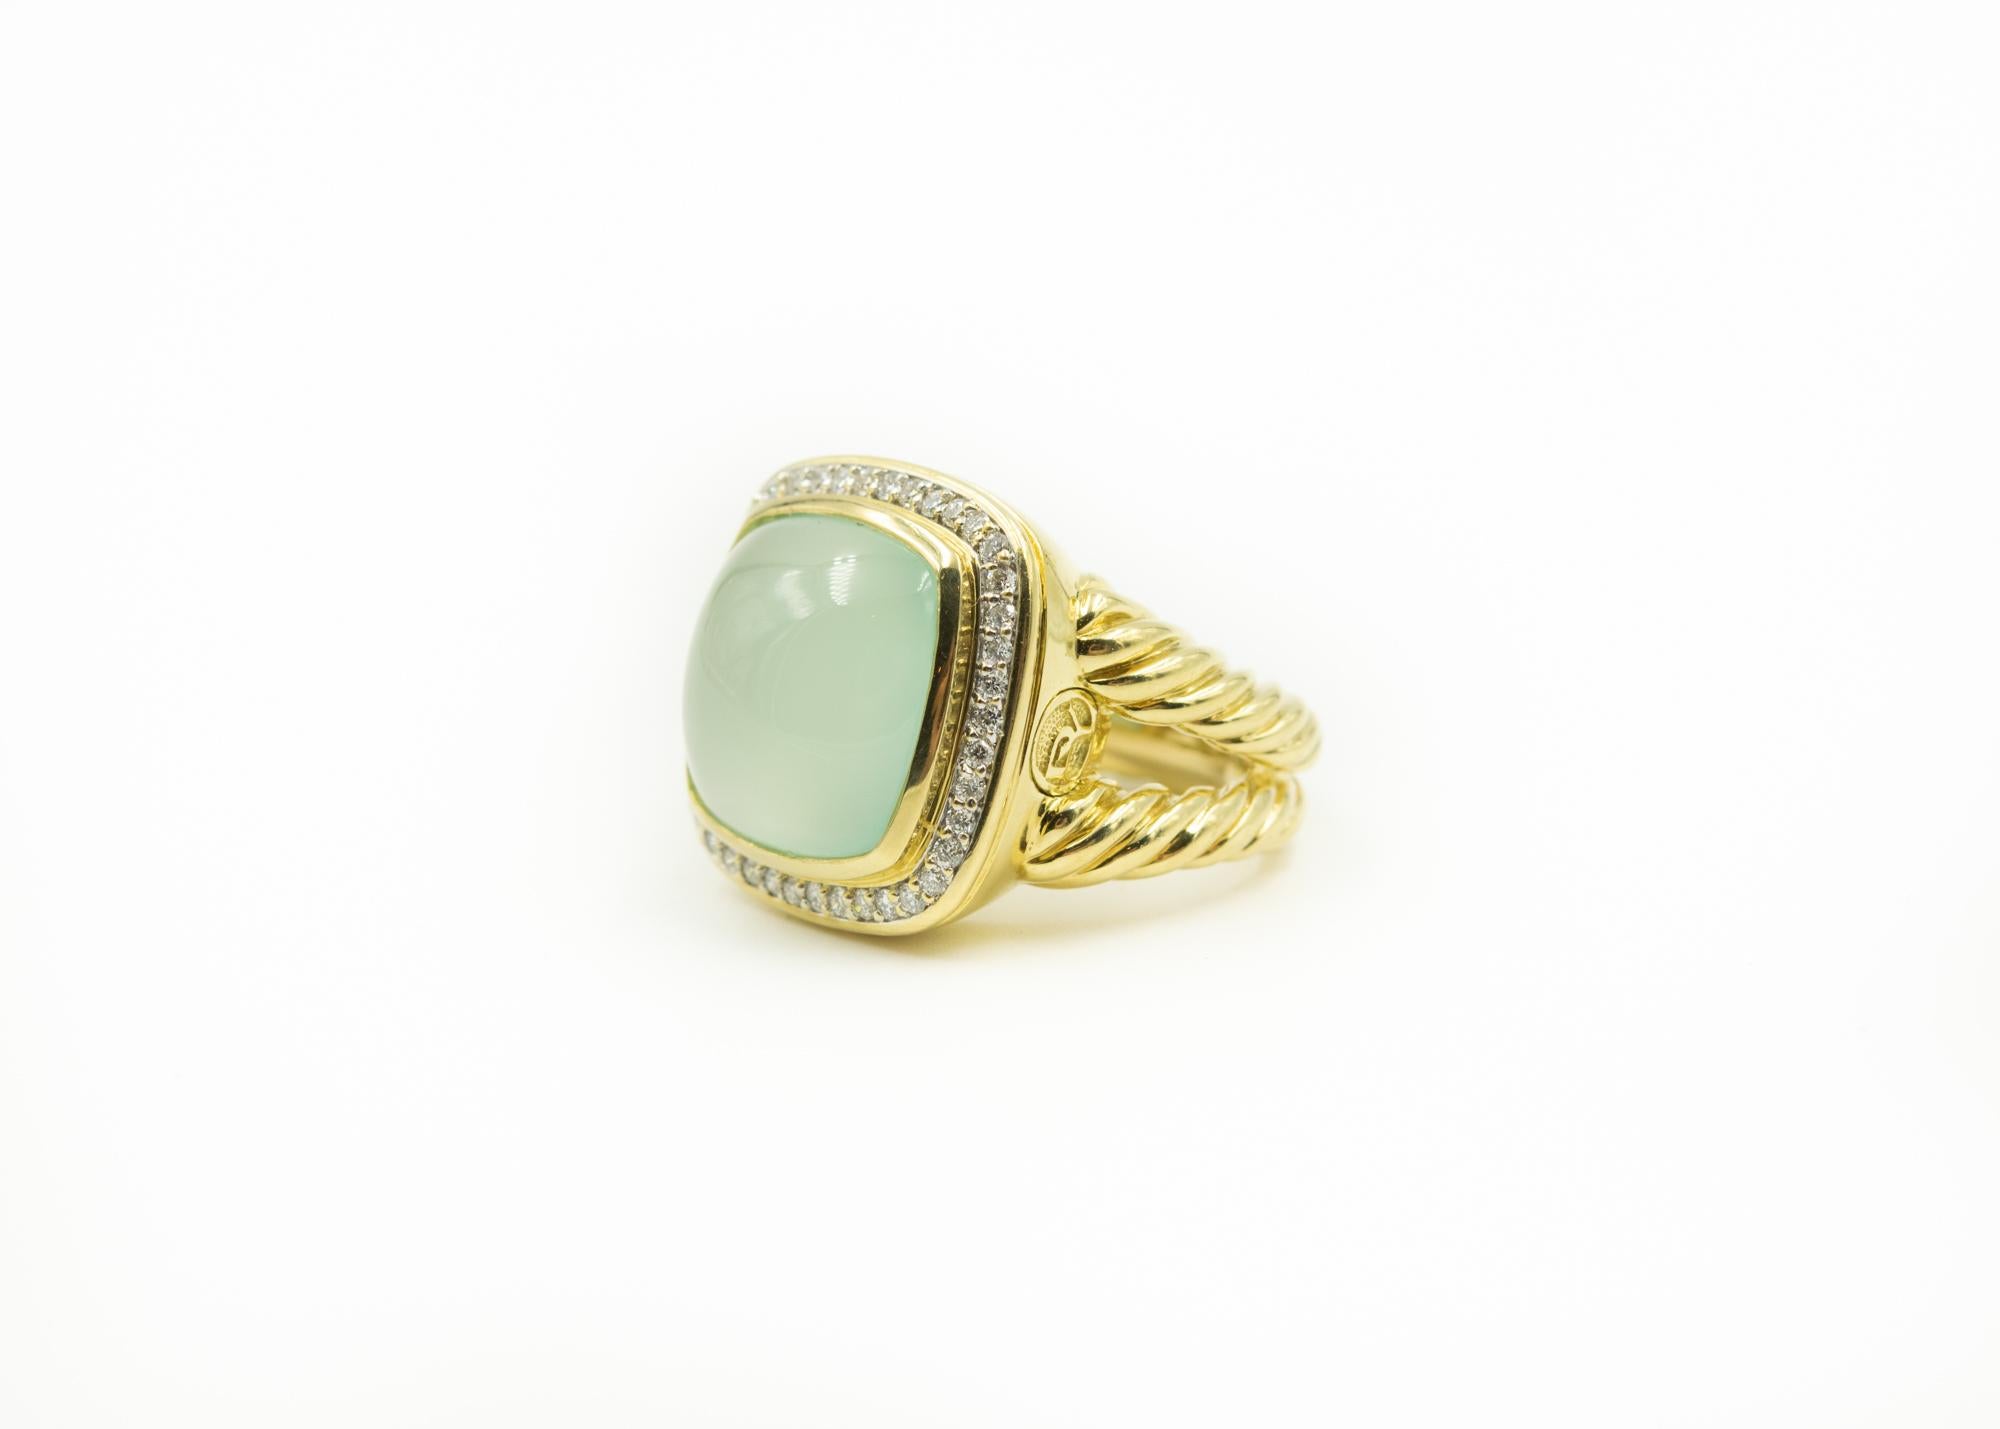 18K yellow gold David Yurman Albion ring featuring cabochon aqua chalcedony with diamond halo and split cable textured shank.  Marked with DY logo on the outside side. Interior marks covered by ring sizer. 

Size 4.5